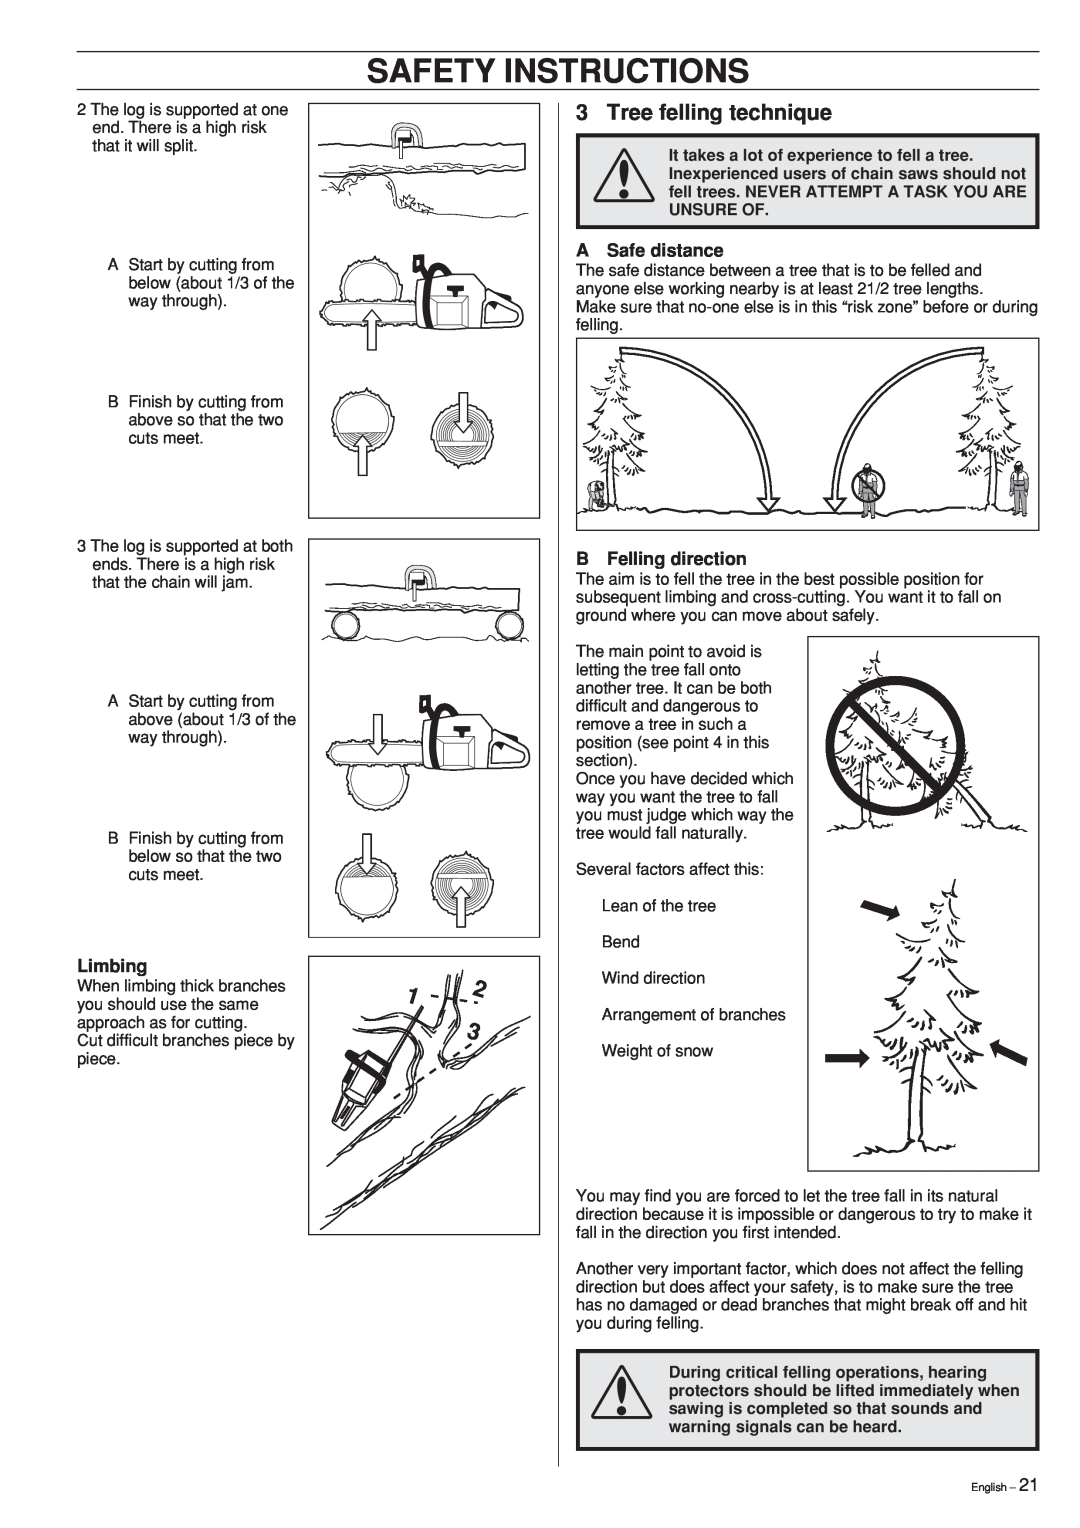 Jonsered CS 2152 manual Tree felling technique, A Safe distance, Limbing, B Felling direction, Safety Instructions 